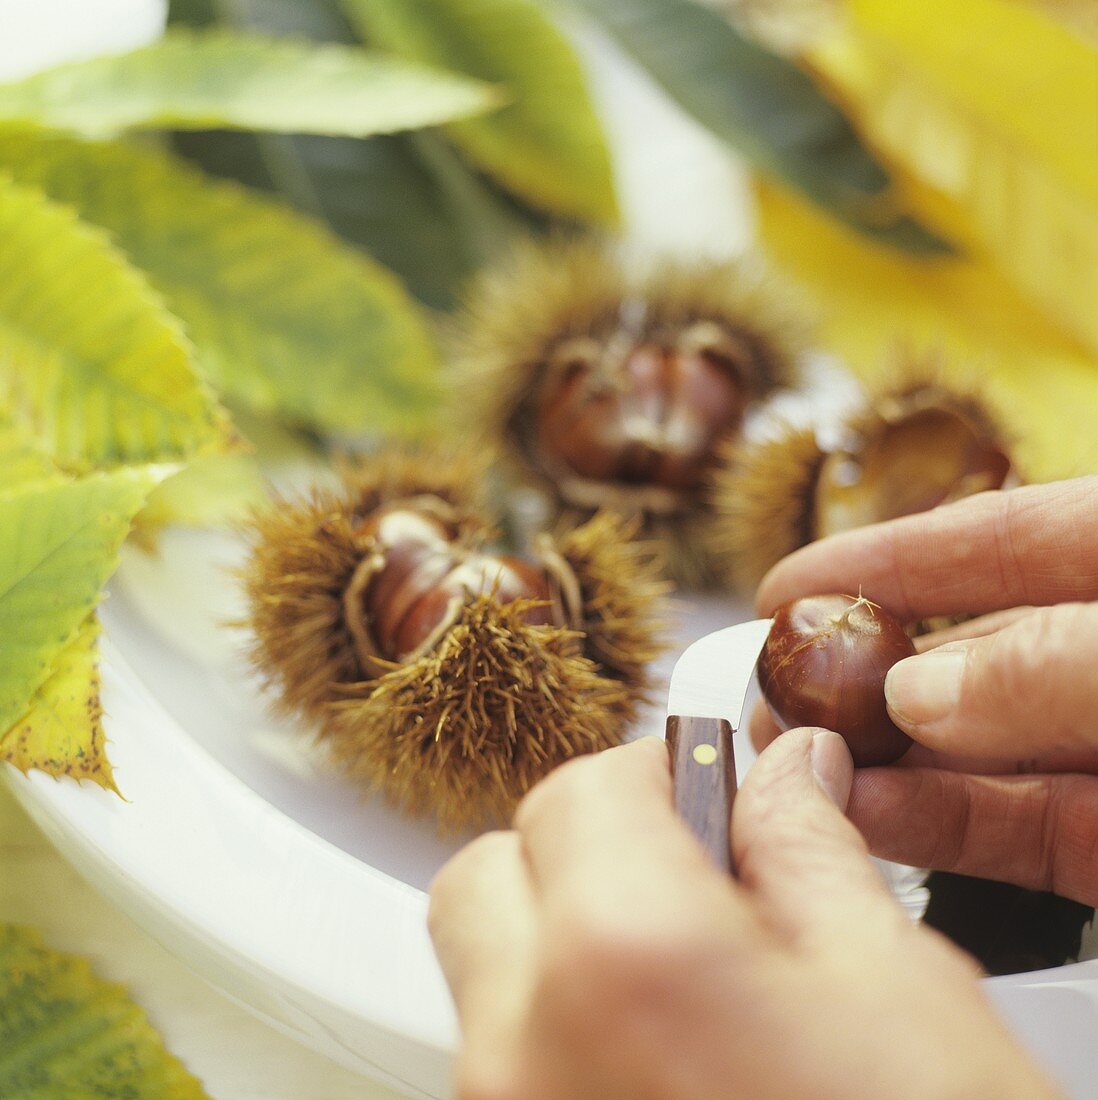 Scoring sweet chestnuts with a knife